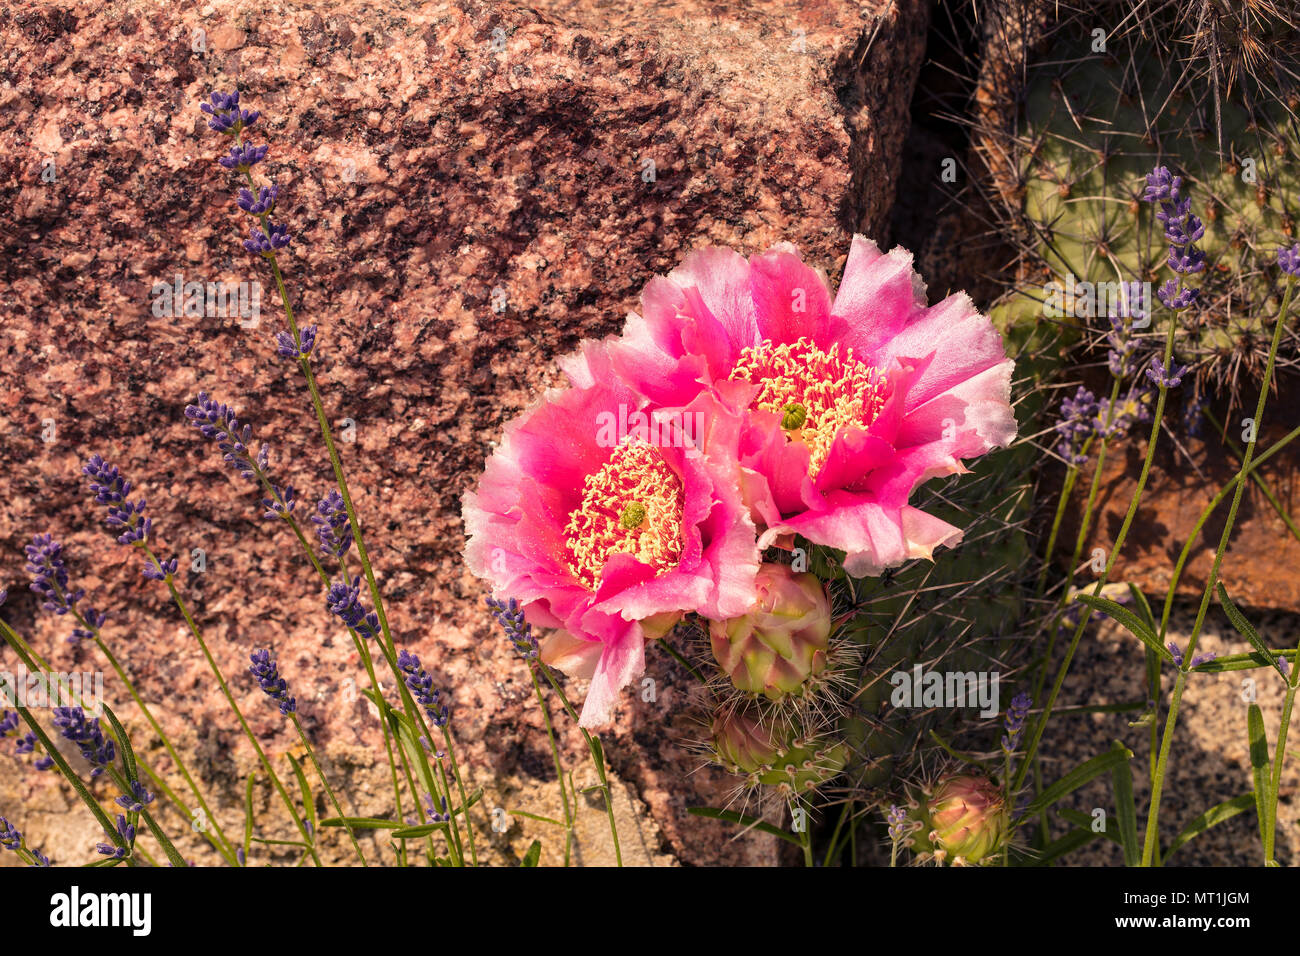 Opuntia phaeacantha blossomed in pink colors with lavender against a stone Stock Photo